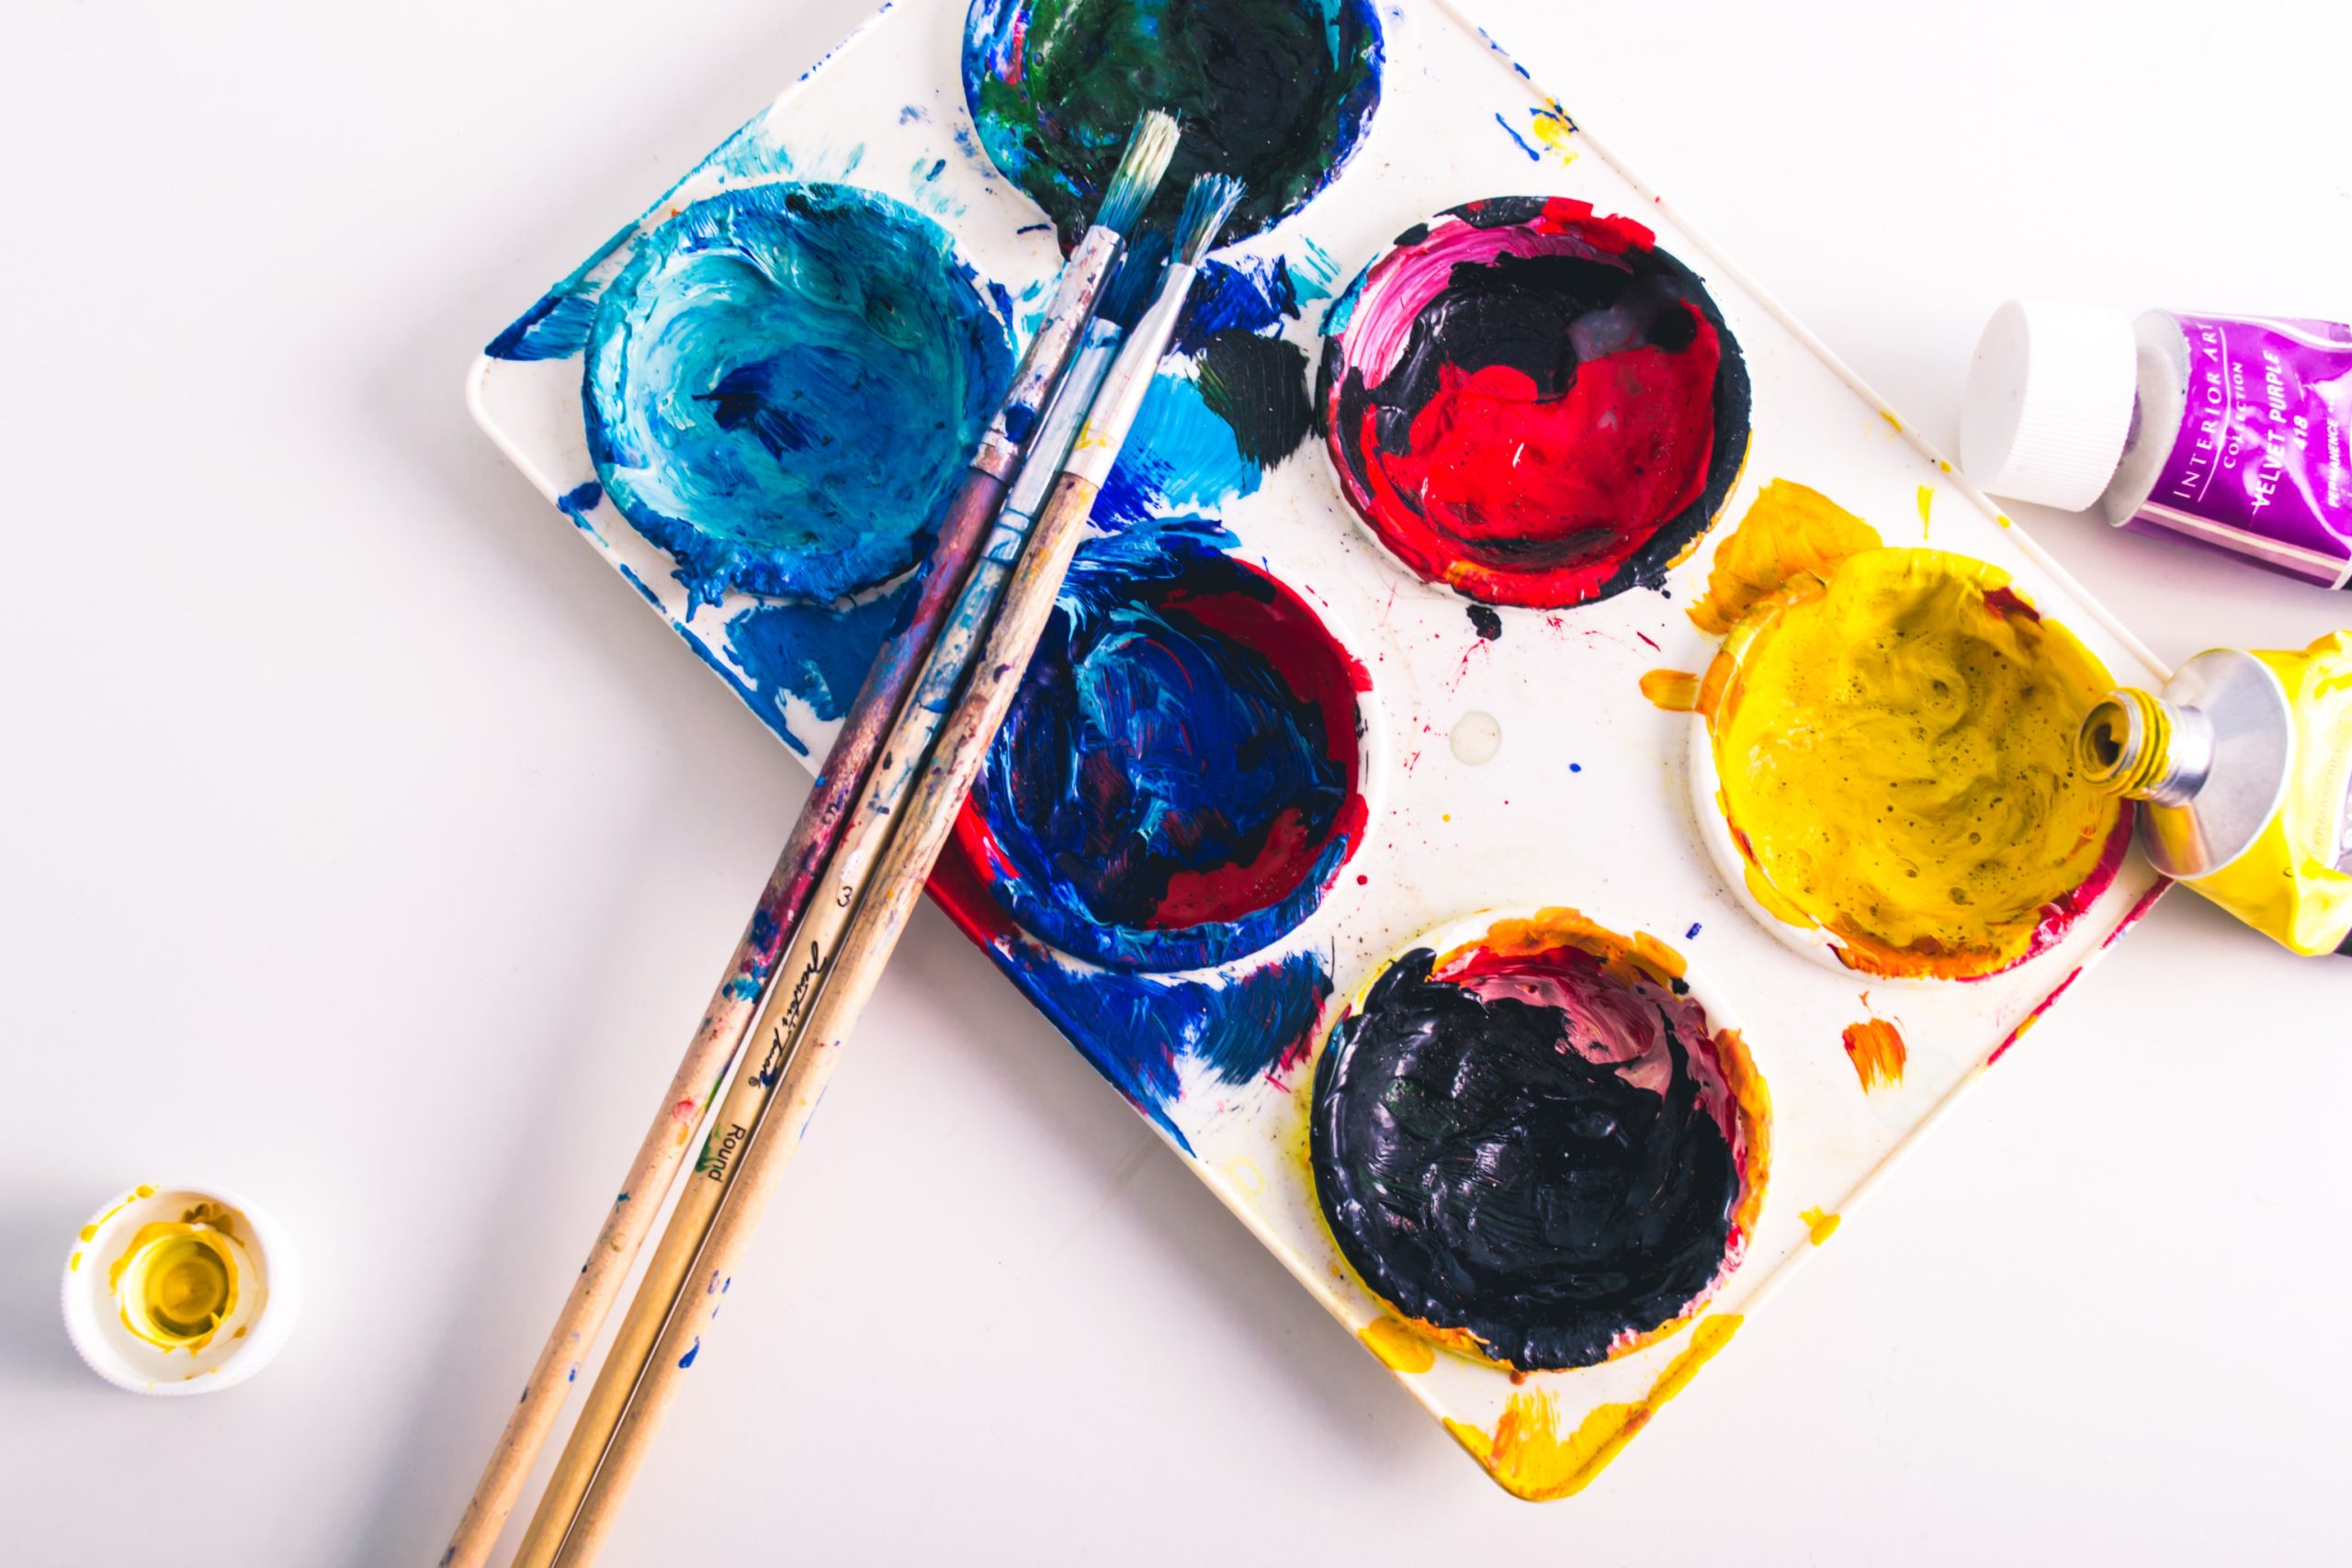 If you're looking for a way to make some extra cash, consider turning your hobby into a money-making venture. Here are 25 fun hobbies that can help you do just that!